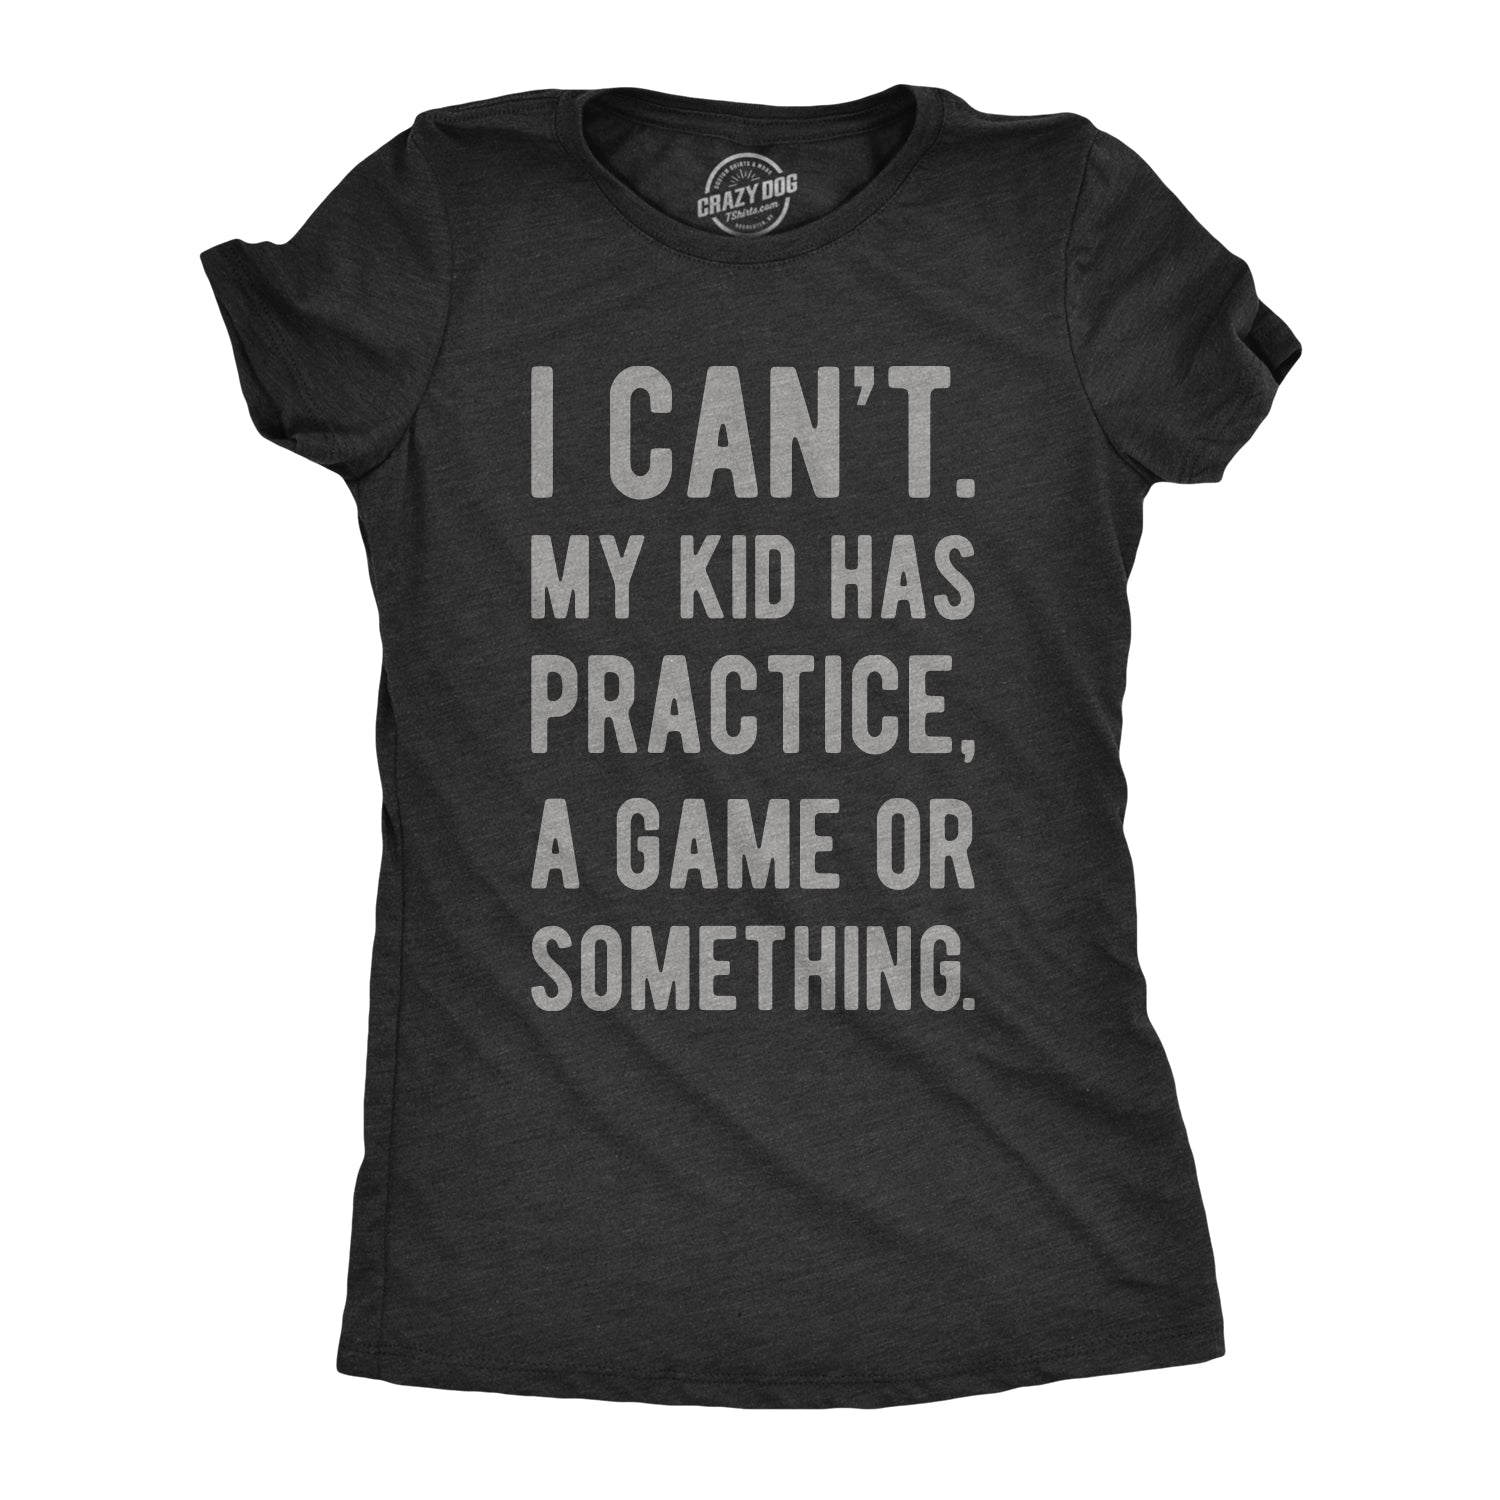 Funny Heather Black I Can't My Kid Has Practice A Game Or Something Womens T Shirt Nerdy Mother's Day Tee